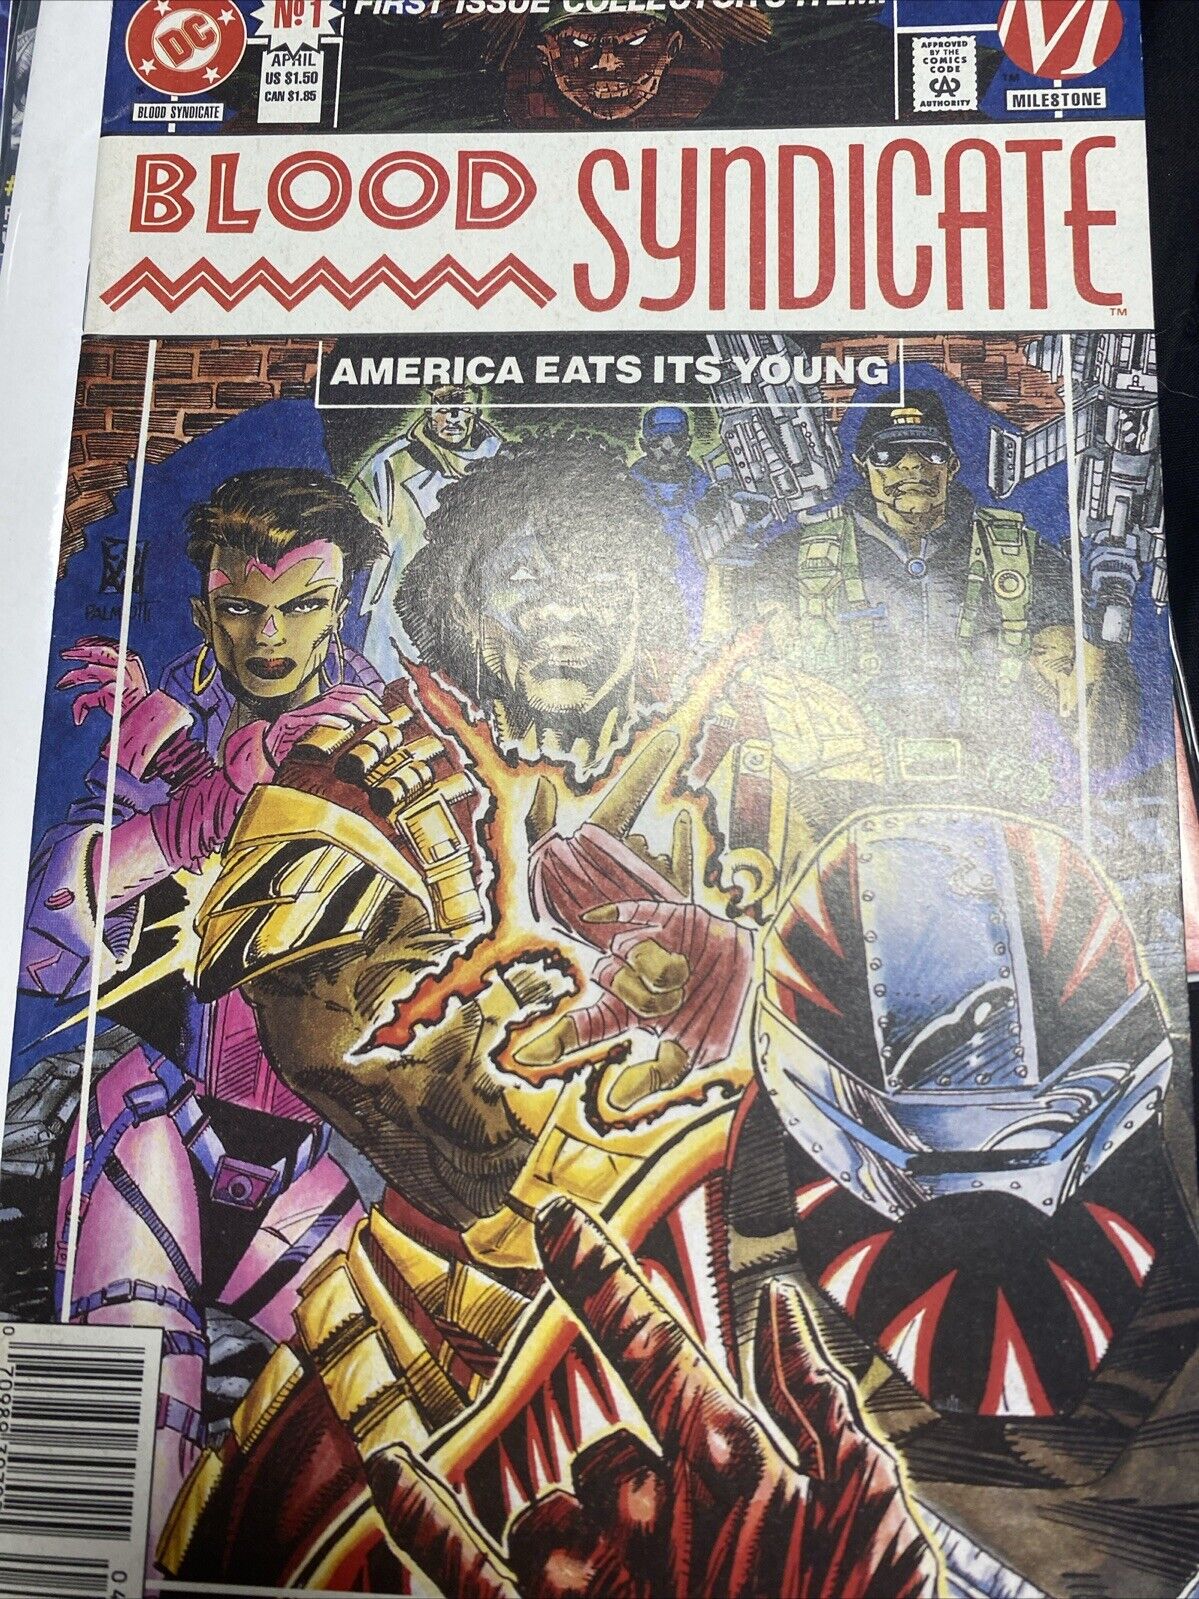 DC MILESTONE COMICS BLOOD SYNDICATE #1 FIRST ISSUE COLLECTOR\'S ITEM